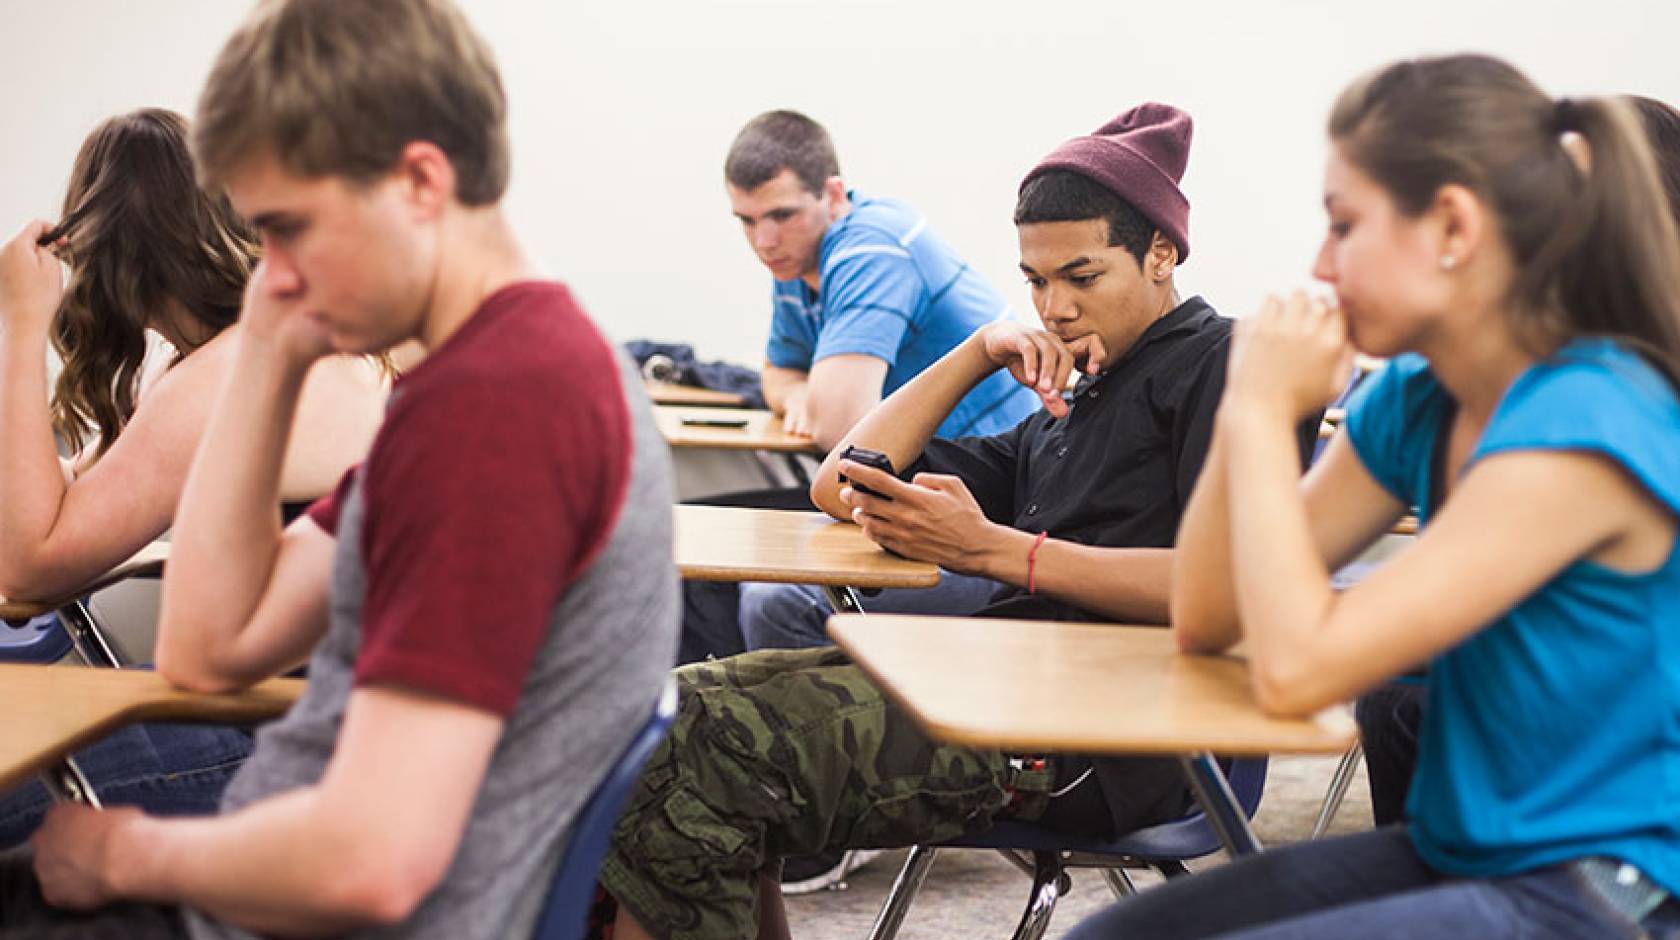 High school students texting in class